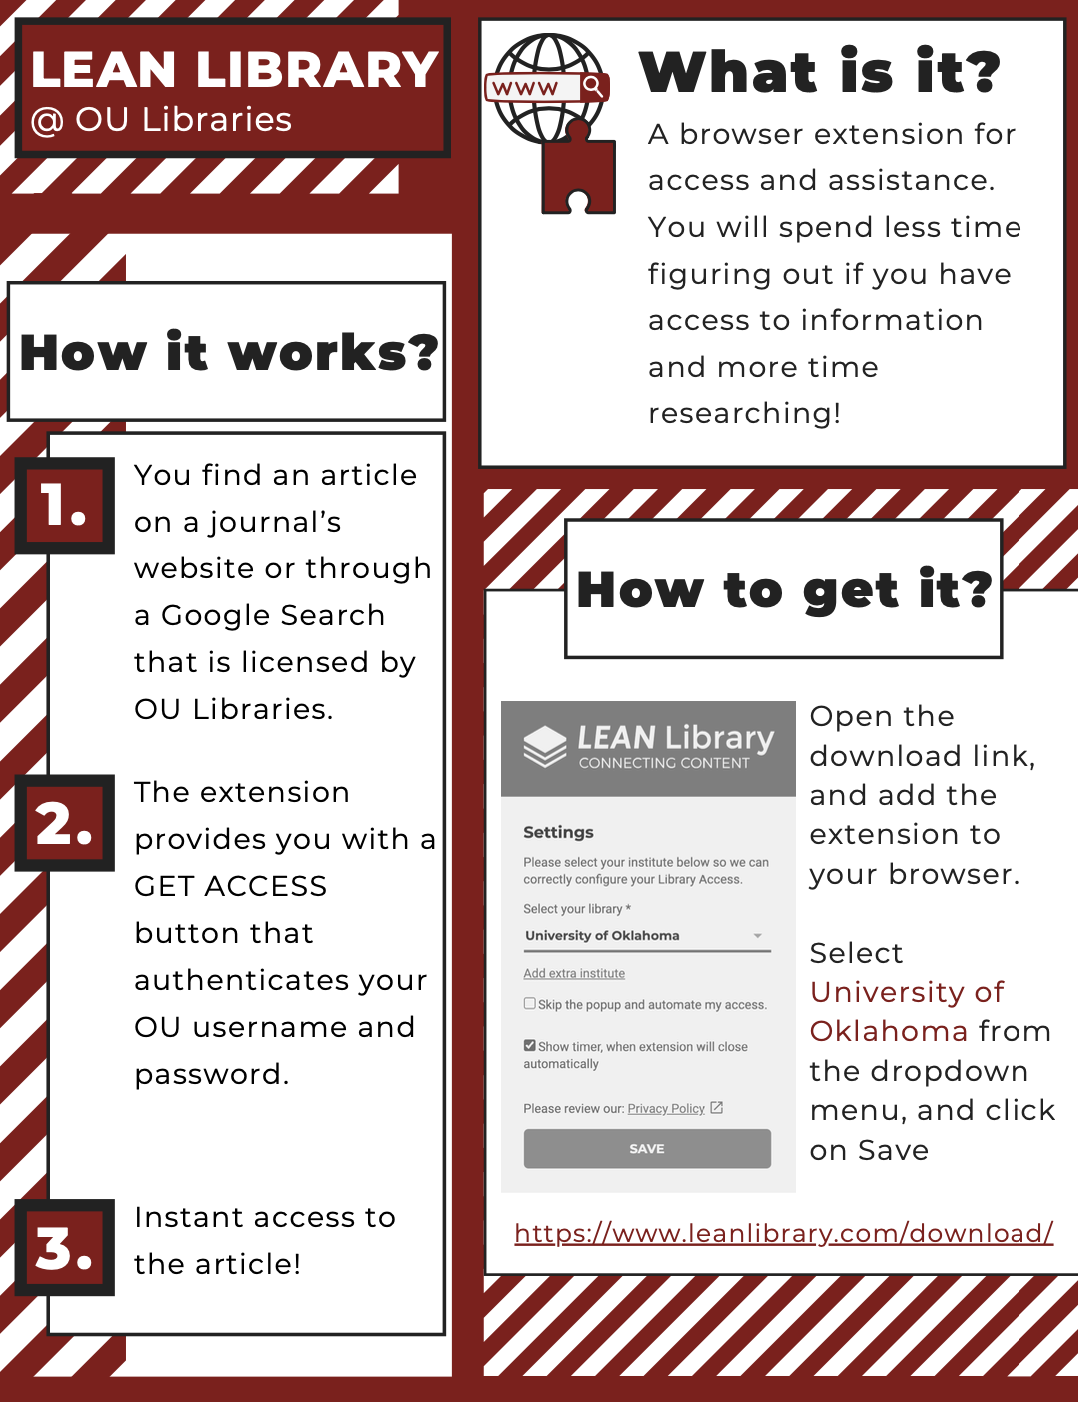 Lean Library info graphic. Sections of how it works, what is it, and how to get it. 